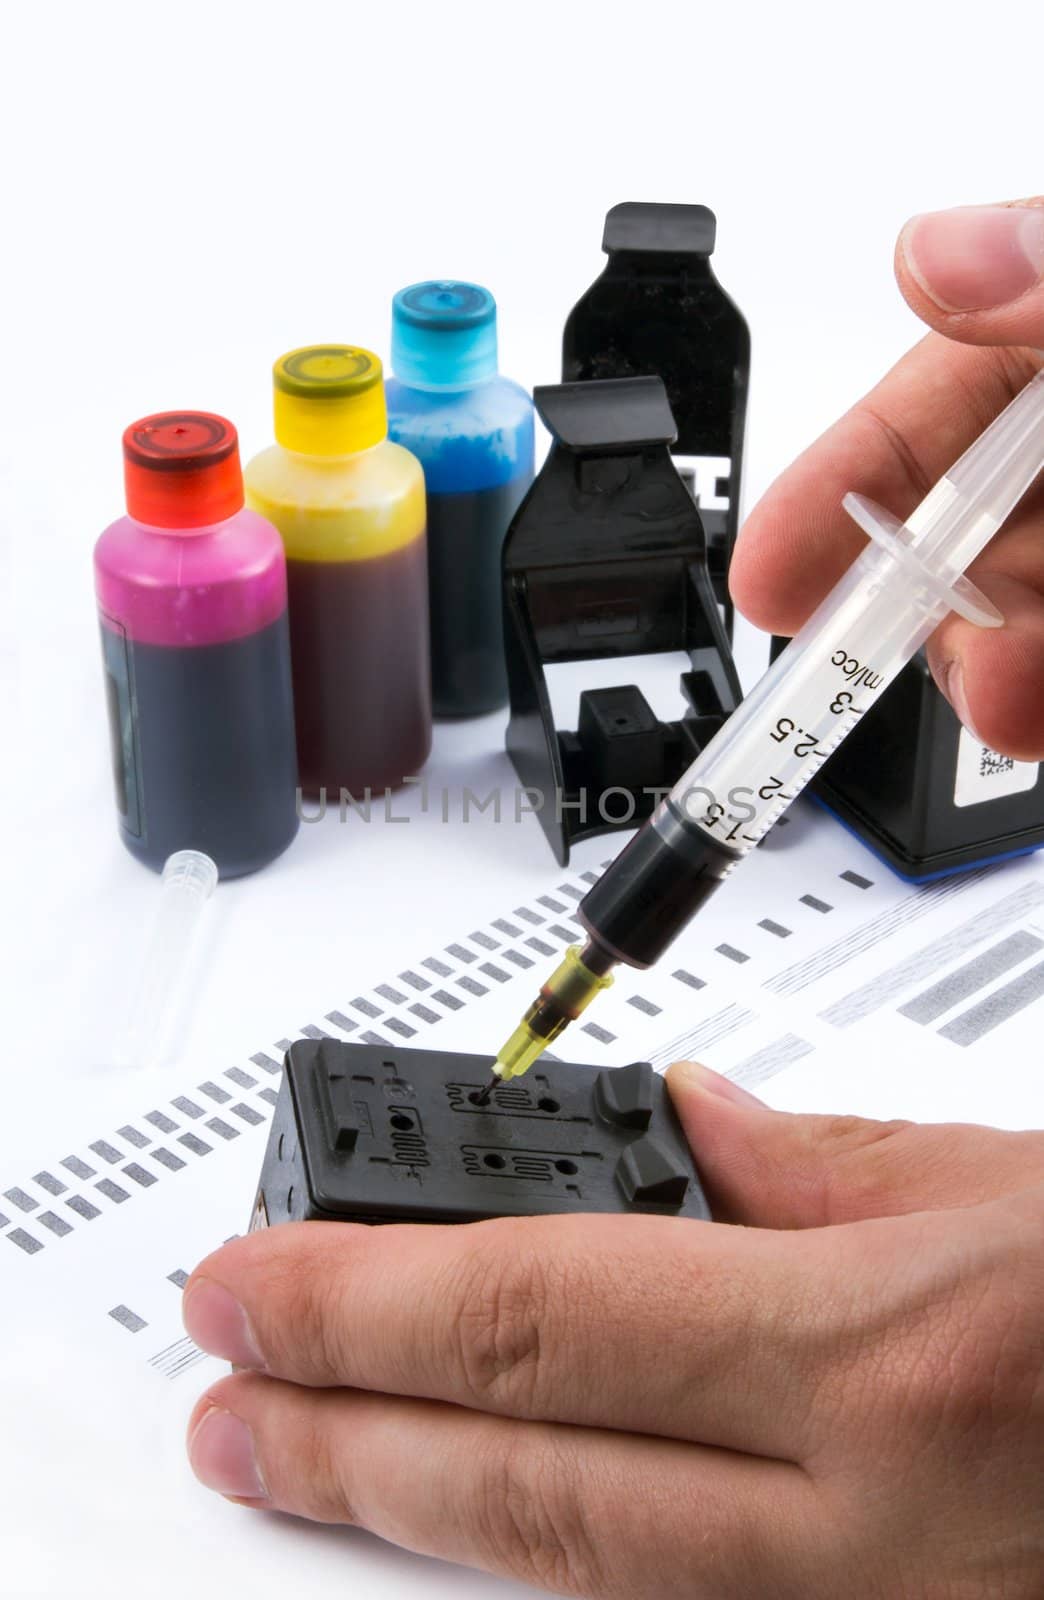 Injecting ink cartridge. Set of refill inkjet for print. by simpson33